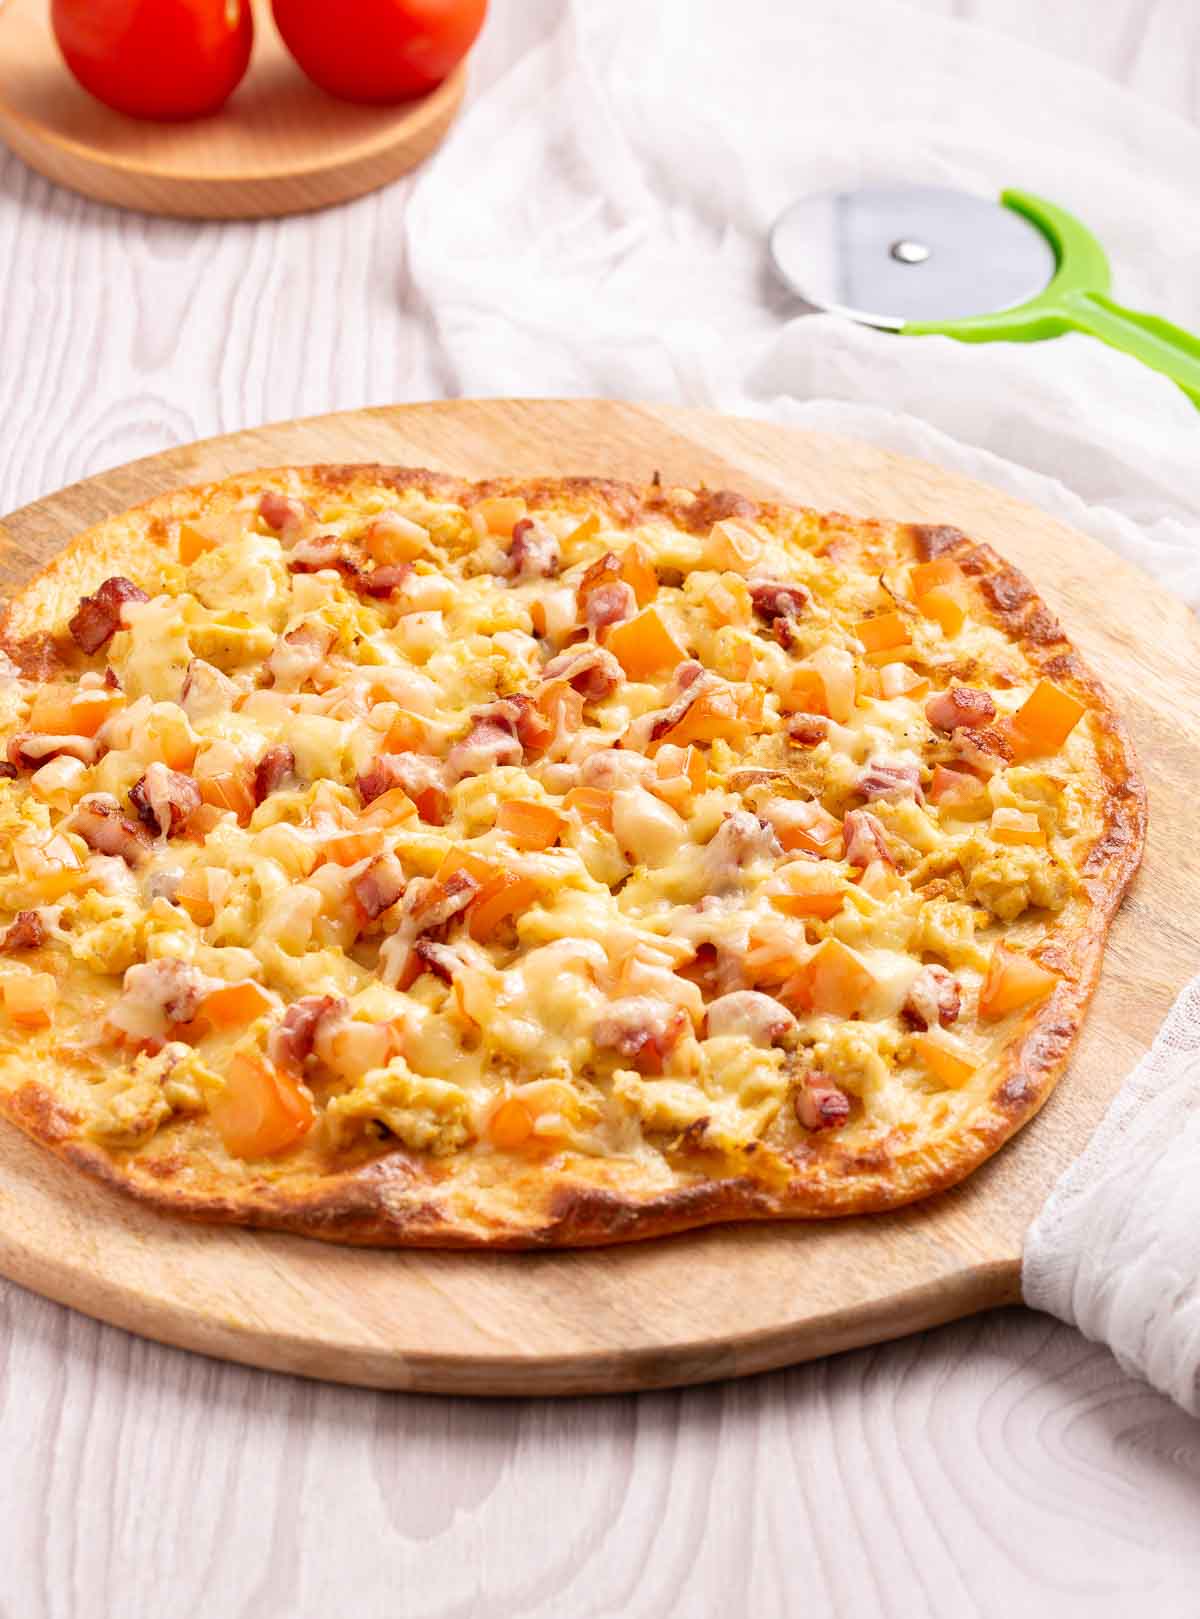 Scramble eggs, bacon , tomatoes and cheese and a low-carb pizza crust.